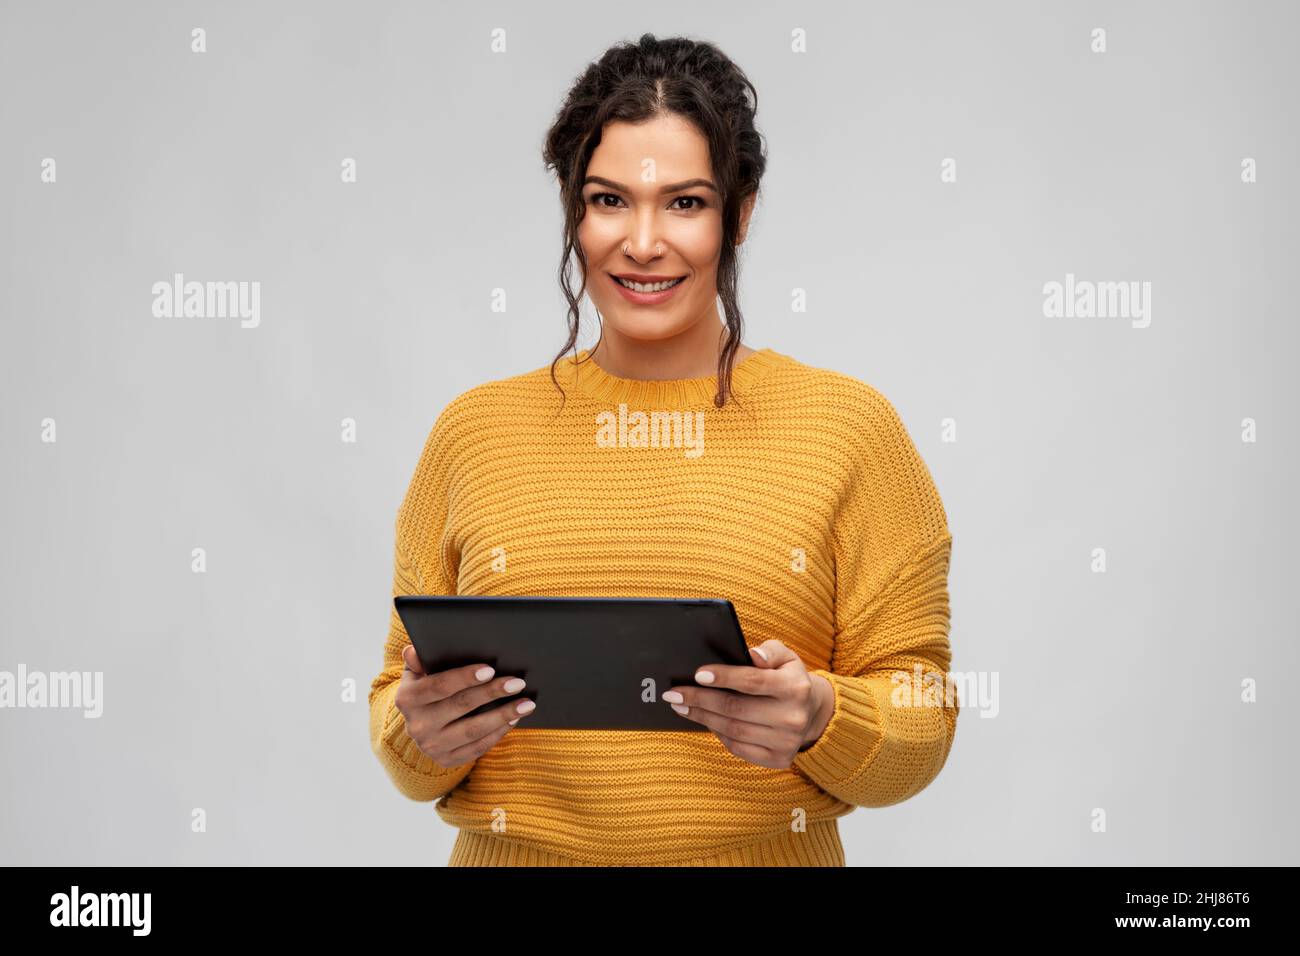 happy young woman using tablet pc computer Stock Photo